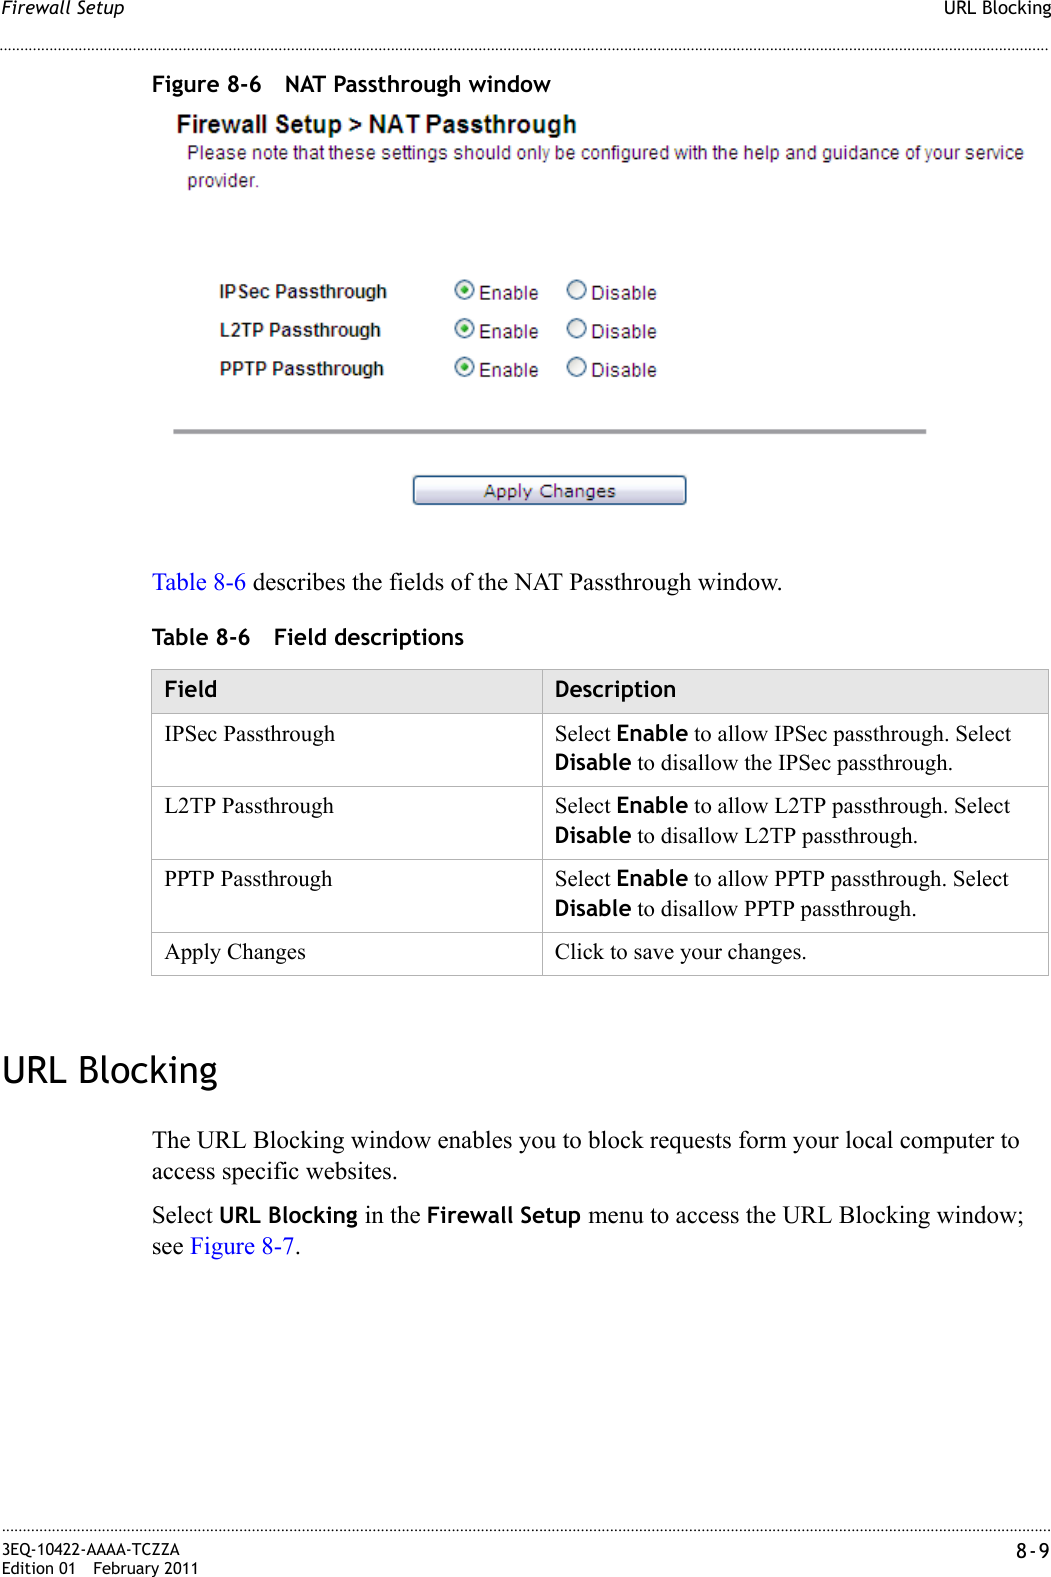 URL BlockingFirewall Setup............................................................................................................................................................................................................................................................3EQ-10422-AAAA-TCZZAEdition 01 February 2011 8-9............................................................................................................................................................................................................................................................Figure 8-6 NAT Passthrough windowTable 8-6 describes the fields of the NAT Passthrough window.Table 8-6 Field descriptionsURL BlockingThe URL Blocking window enables you to block requests form your local computer to access specific websites.Select URL Blocking in the Firewall Setup menu to access the URL Blocking window; see Figure 8-7.Field DescriptionIPSec Passthrough Select Enable to allow IPSec passthrough. Select Disable to disallow the IPSec passthrough.L2TP Passthrough Select Enable to allow L2TP passthrough. Select Disable to disallow L2TP passthrough.PPTP Passthrough Select Enable to allow PPTP passthrough. Select Disable to disallow PPTP passthrough.Apply Changes Click to save your changes.